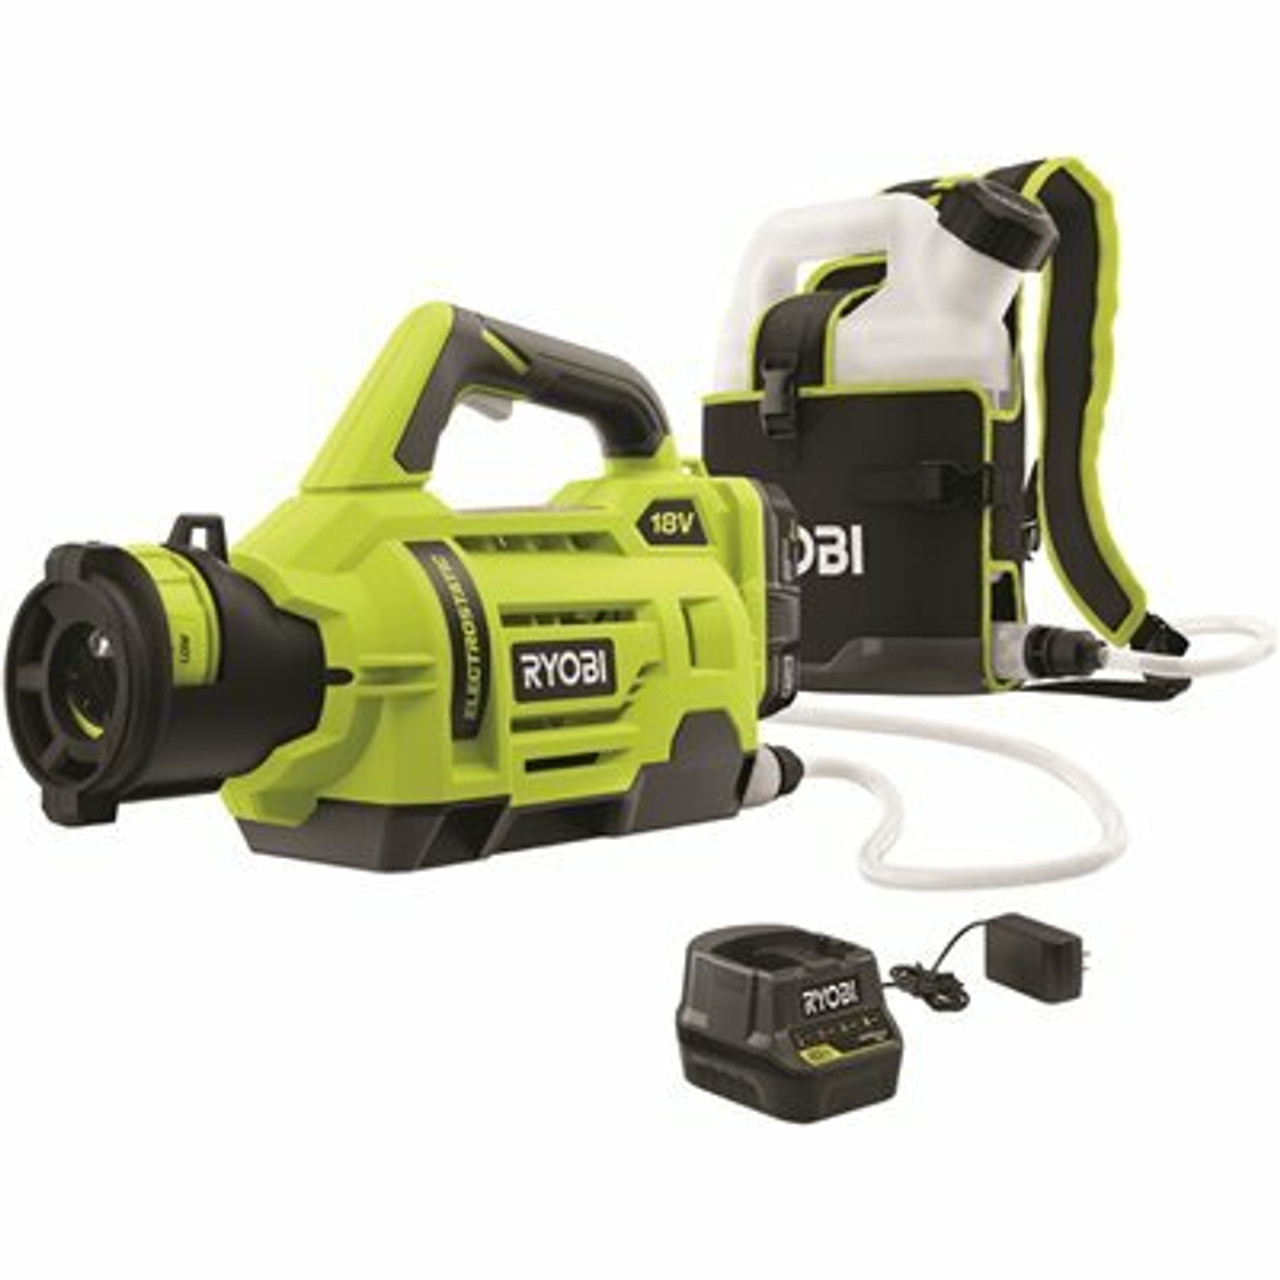 Ryobi One+ 18V Cordless Electrostatic 1 Gal. Sprayer Kit With (2) 2.0 Ah Batteries And (1) Charger